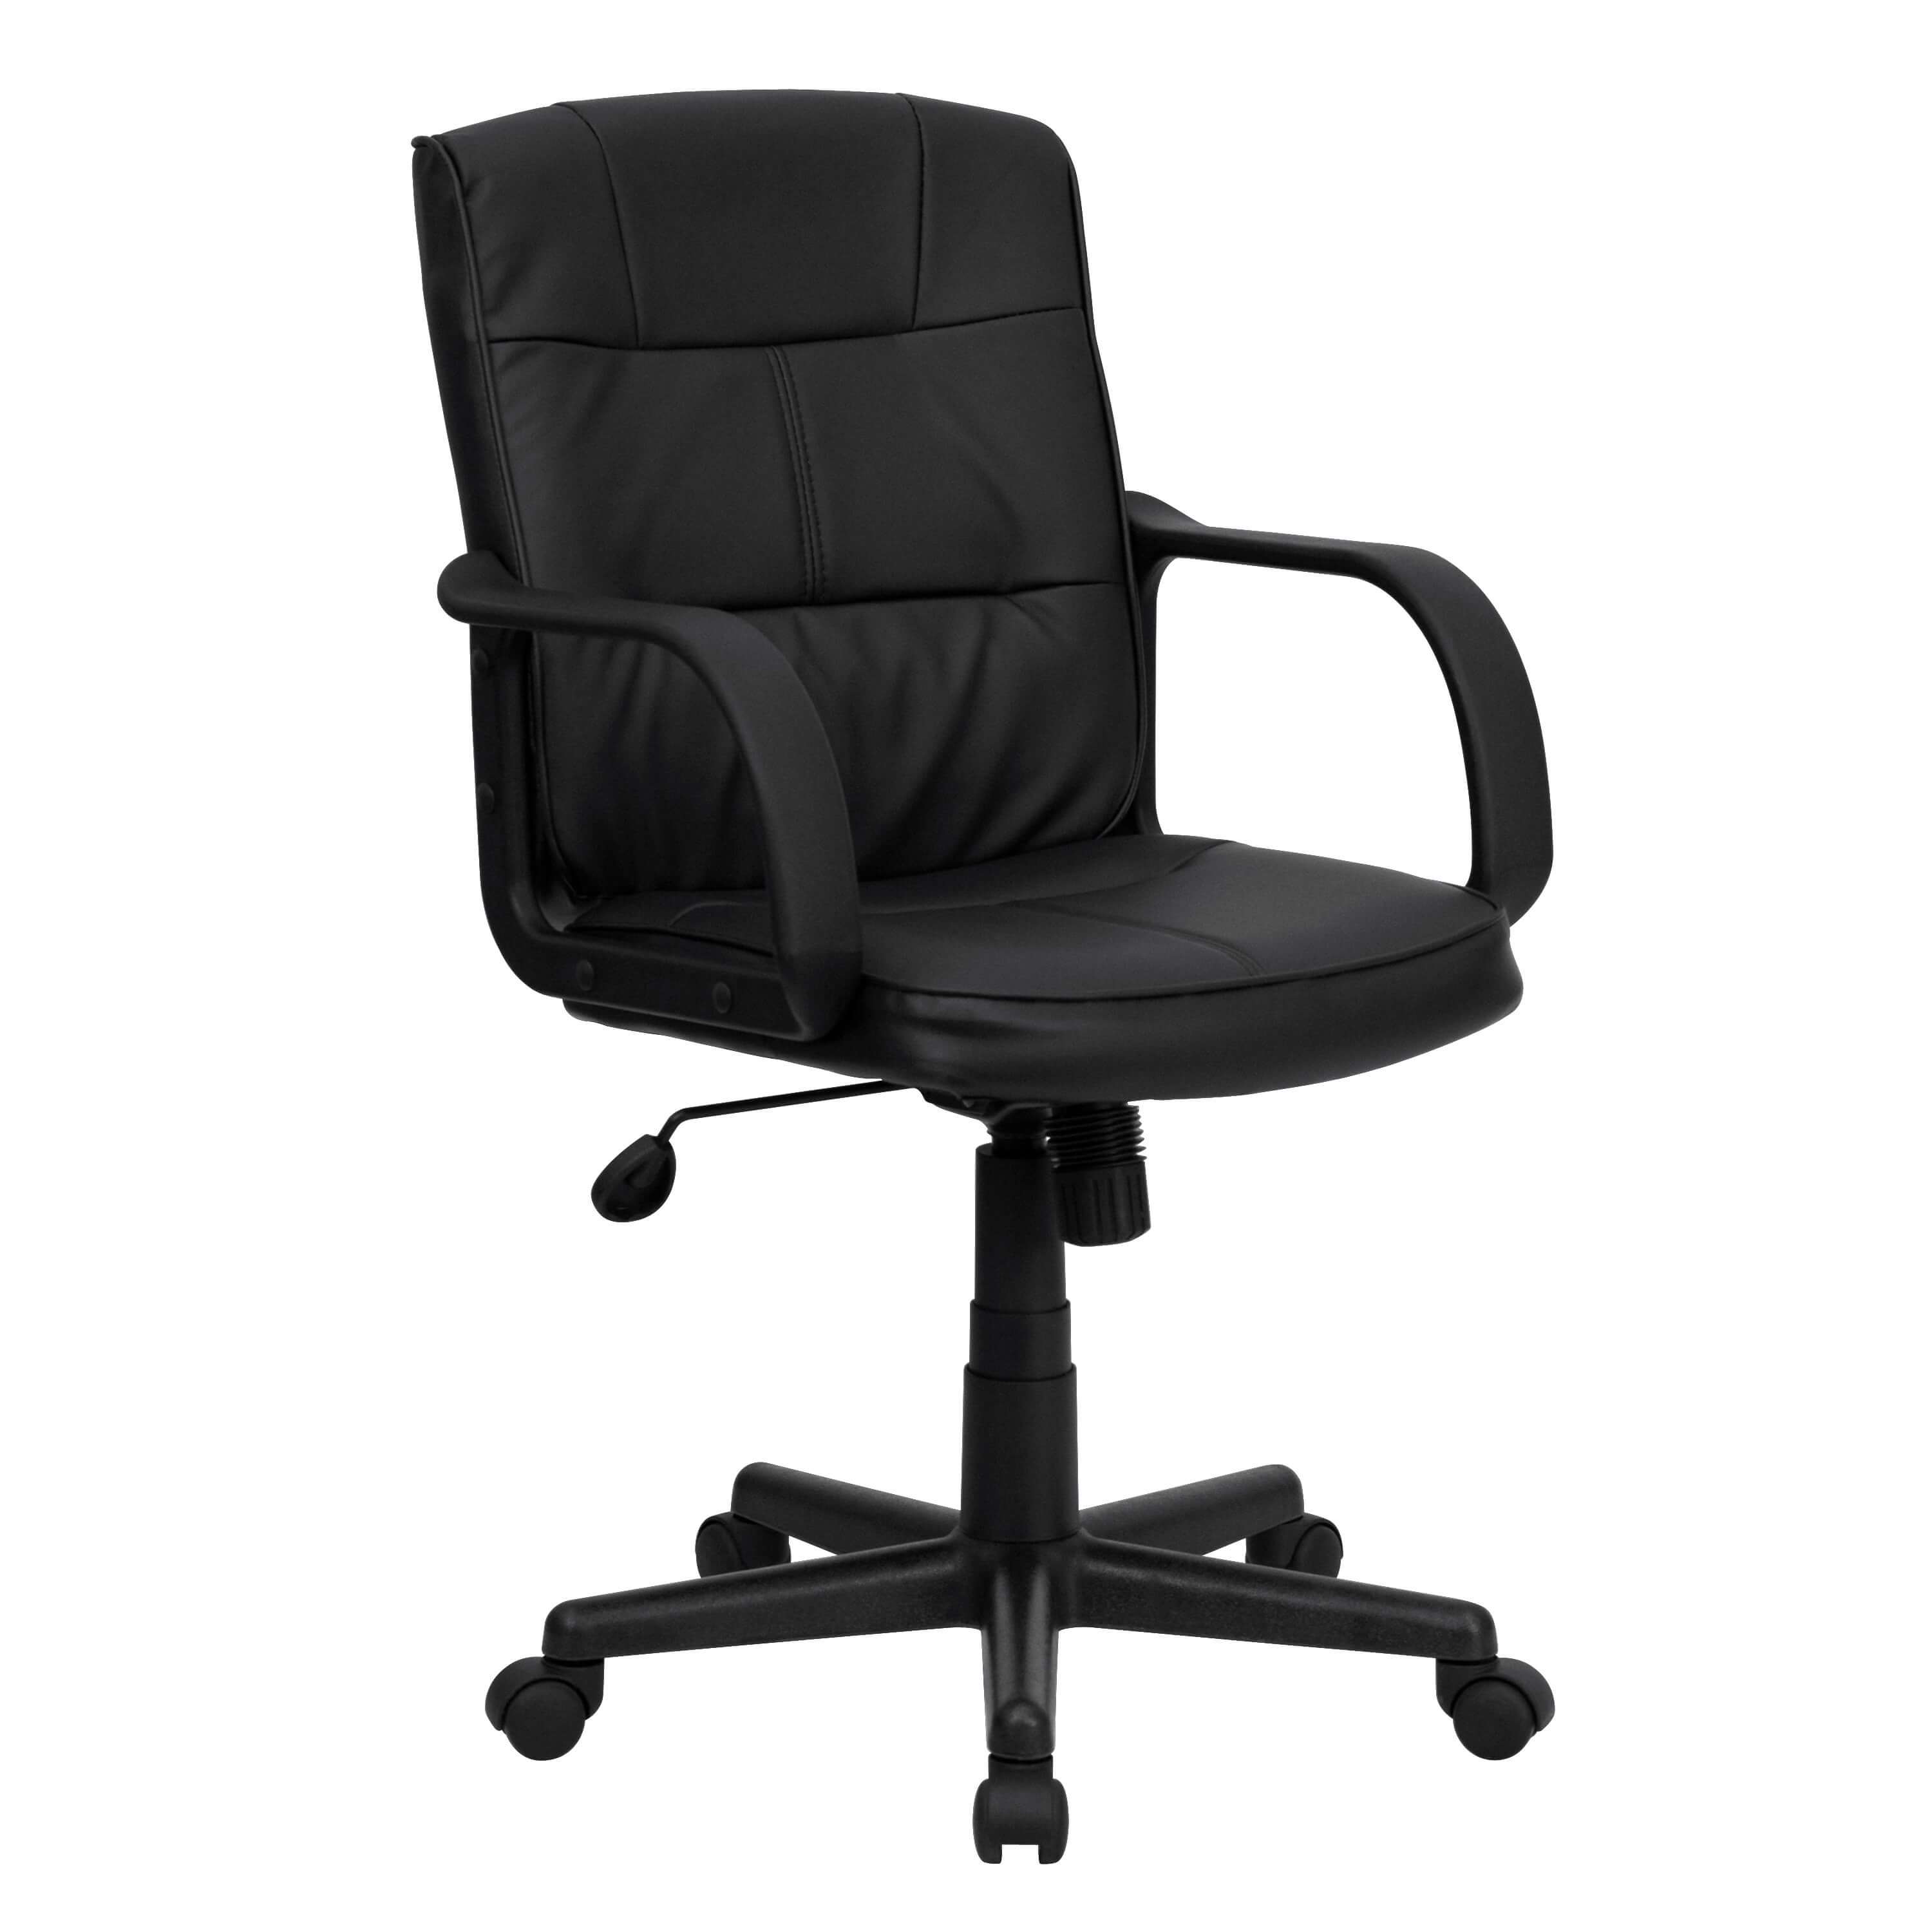 Cool office chairs black leather office chair